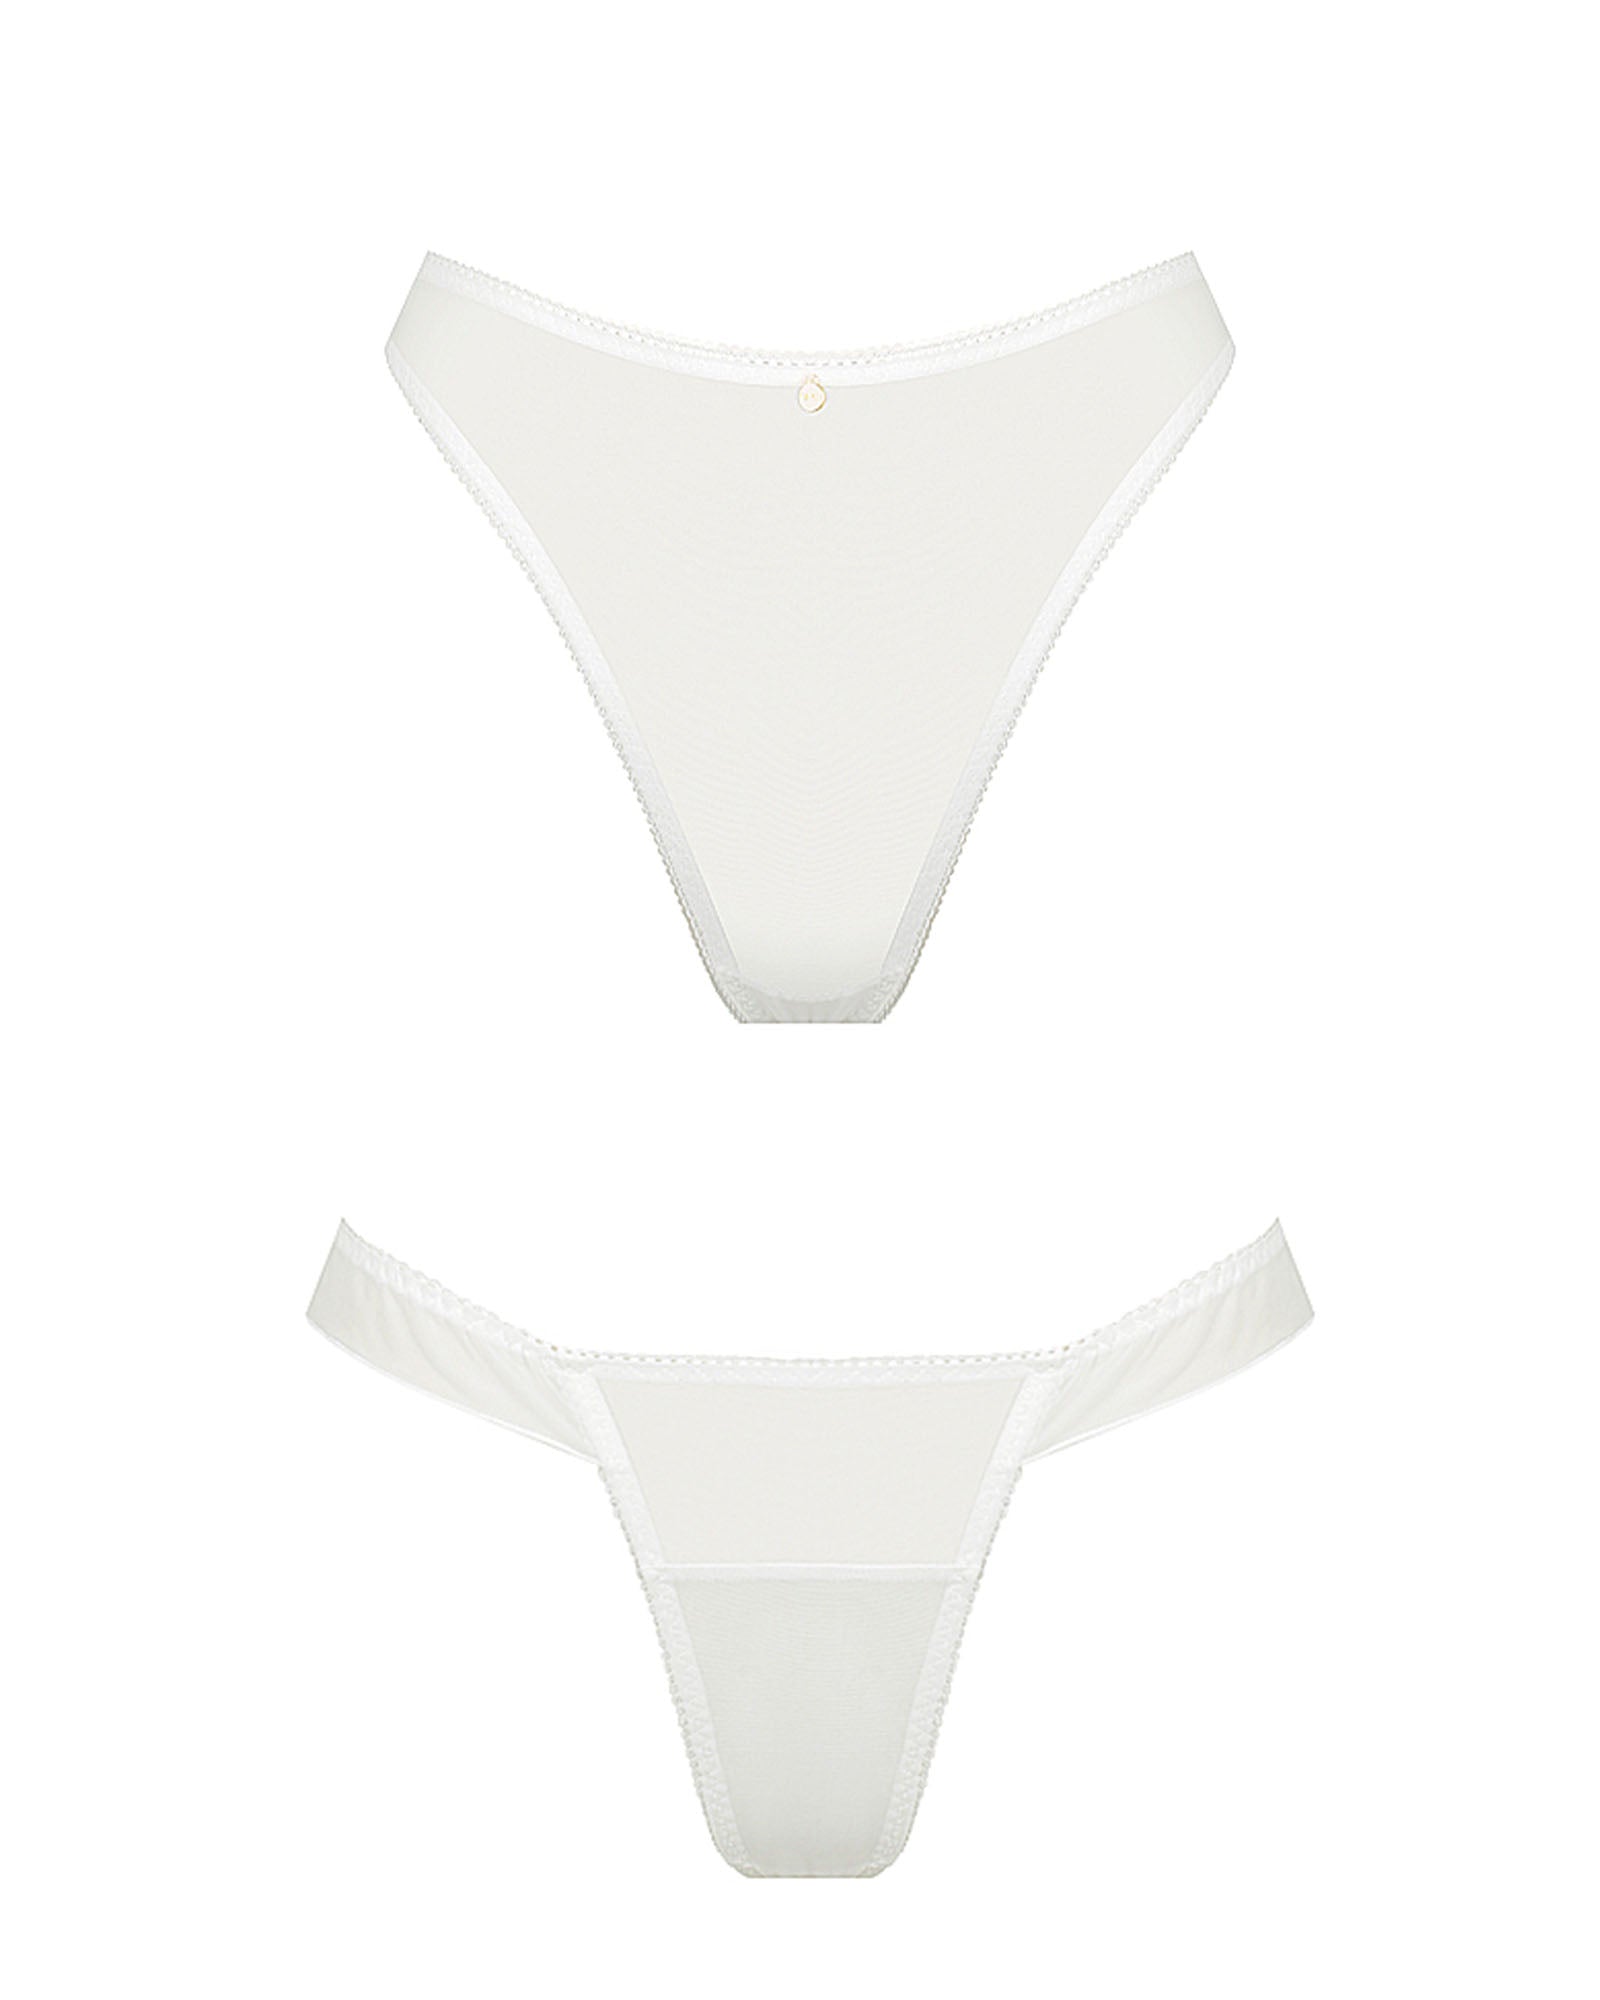 Bella and Elodie Panty Two Pack - White